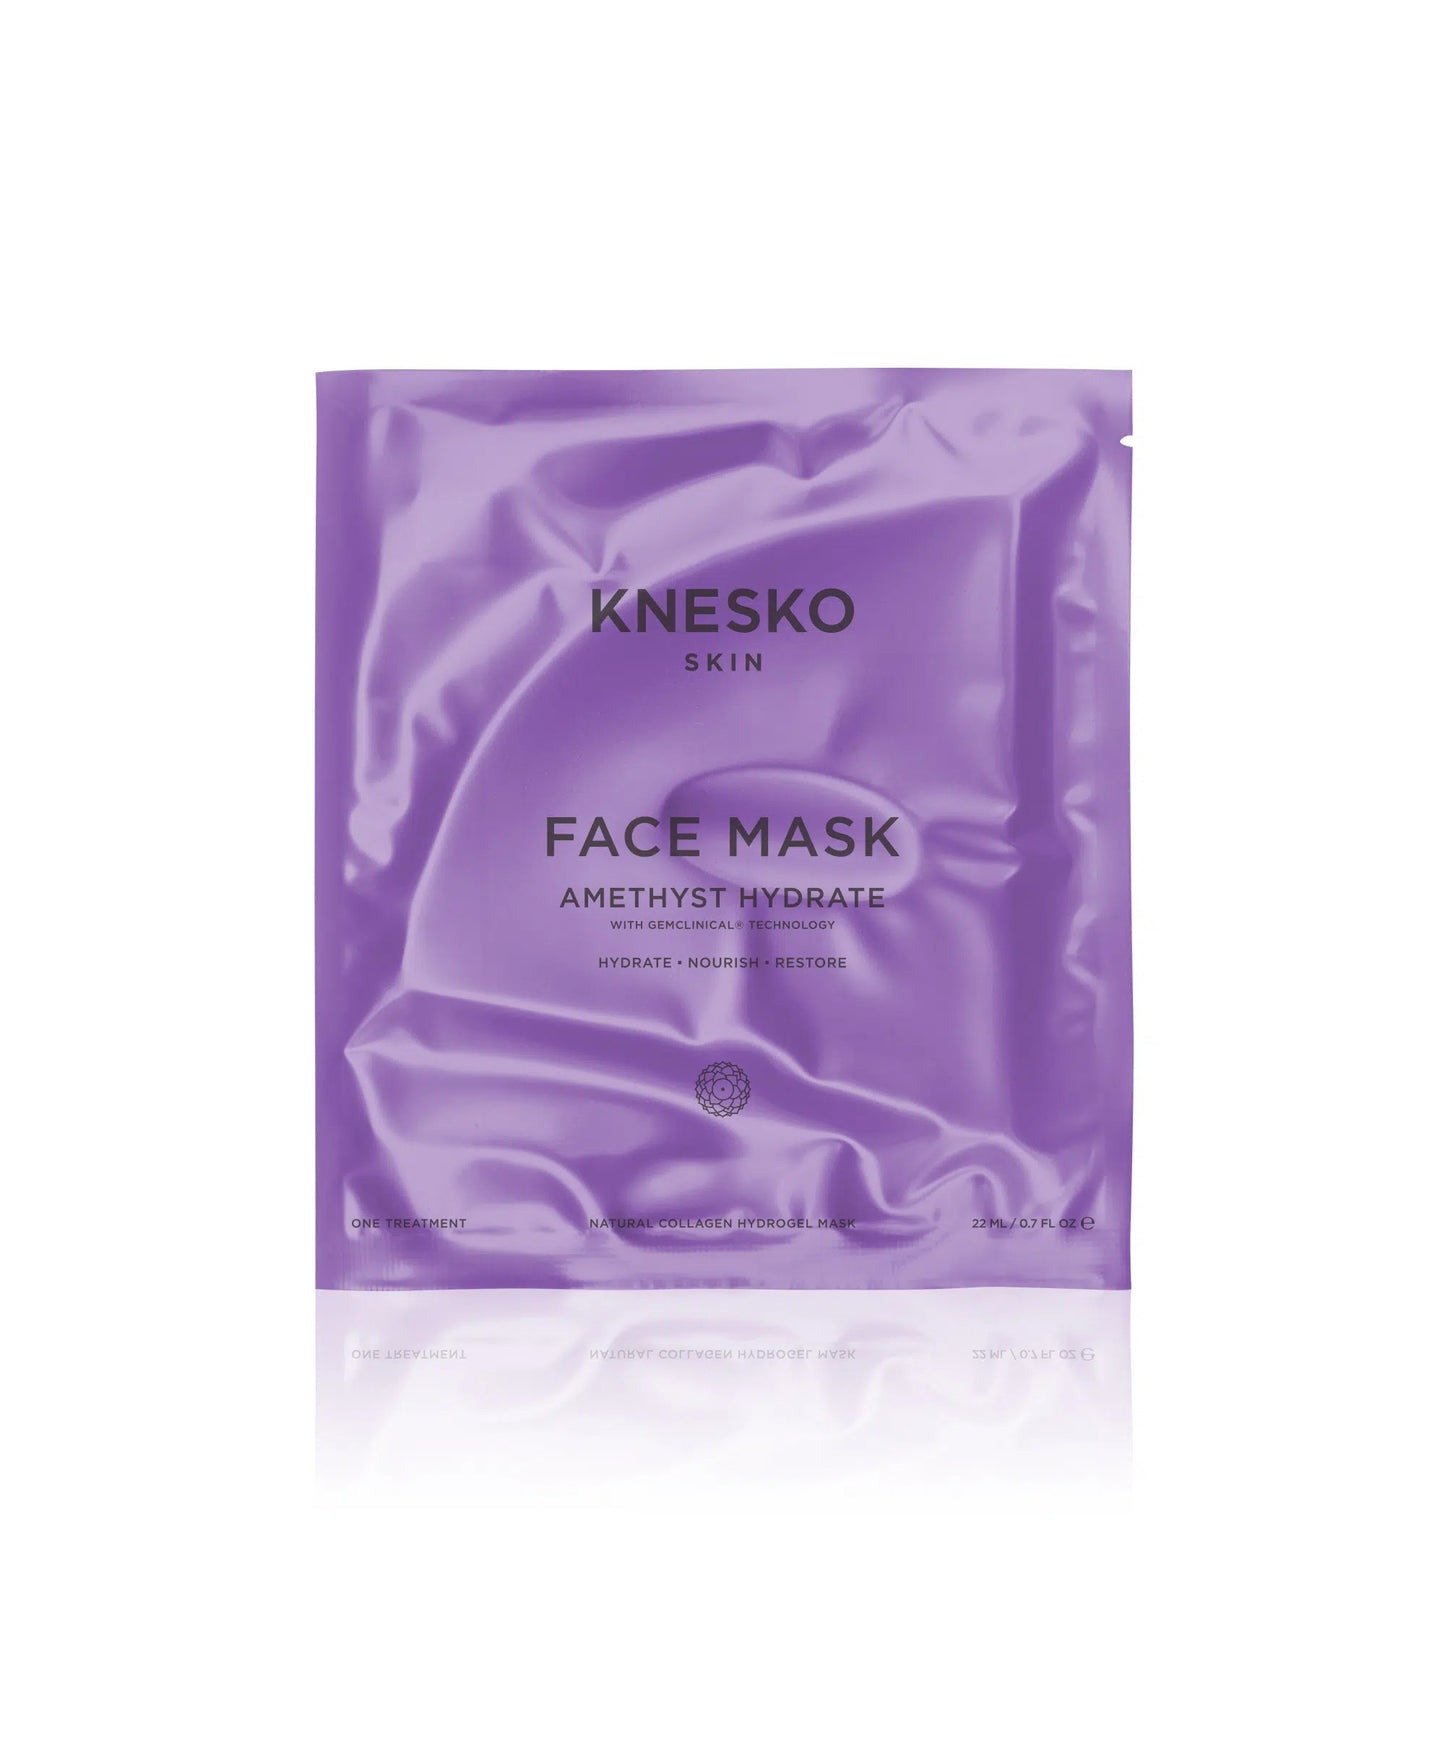 Amethyst Hydrate Face Mask packaging.